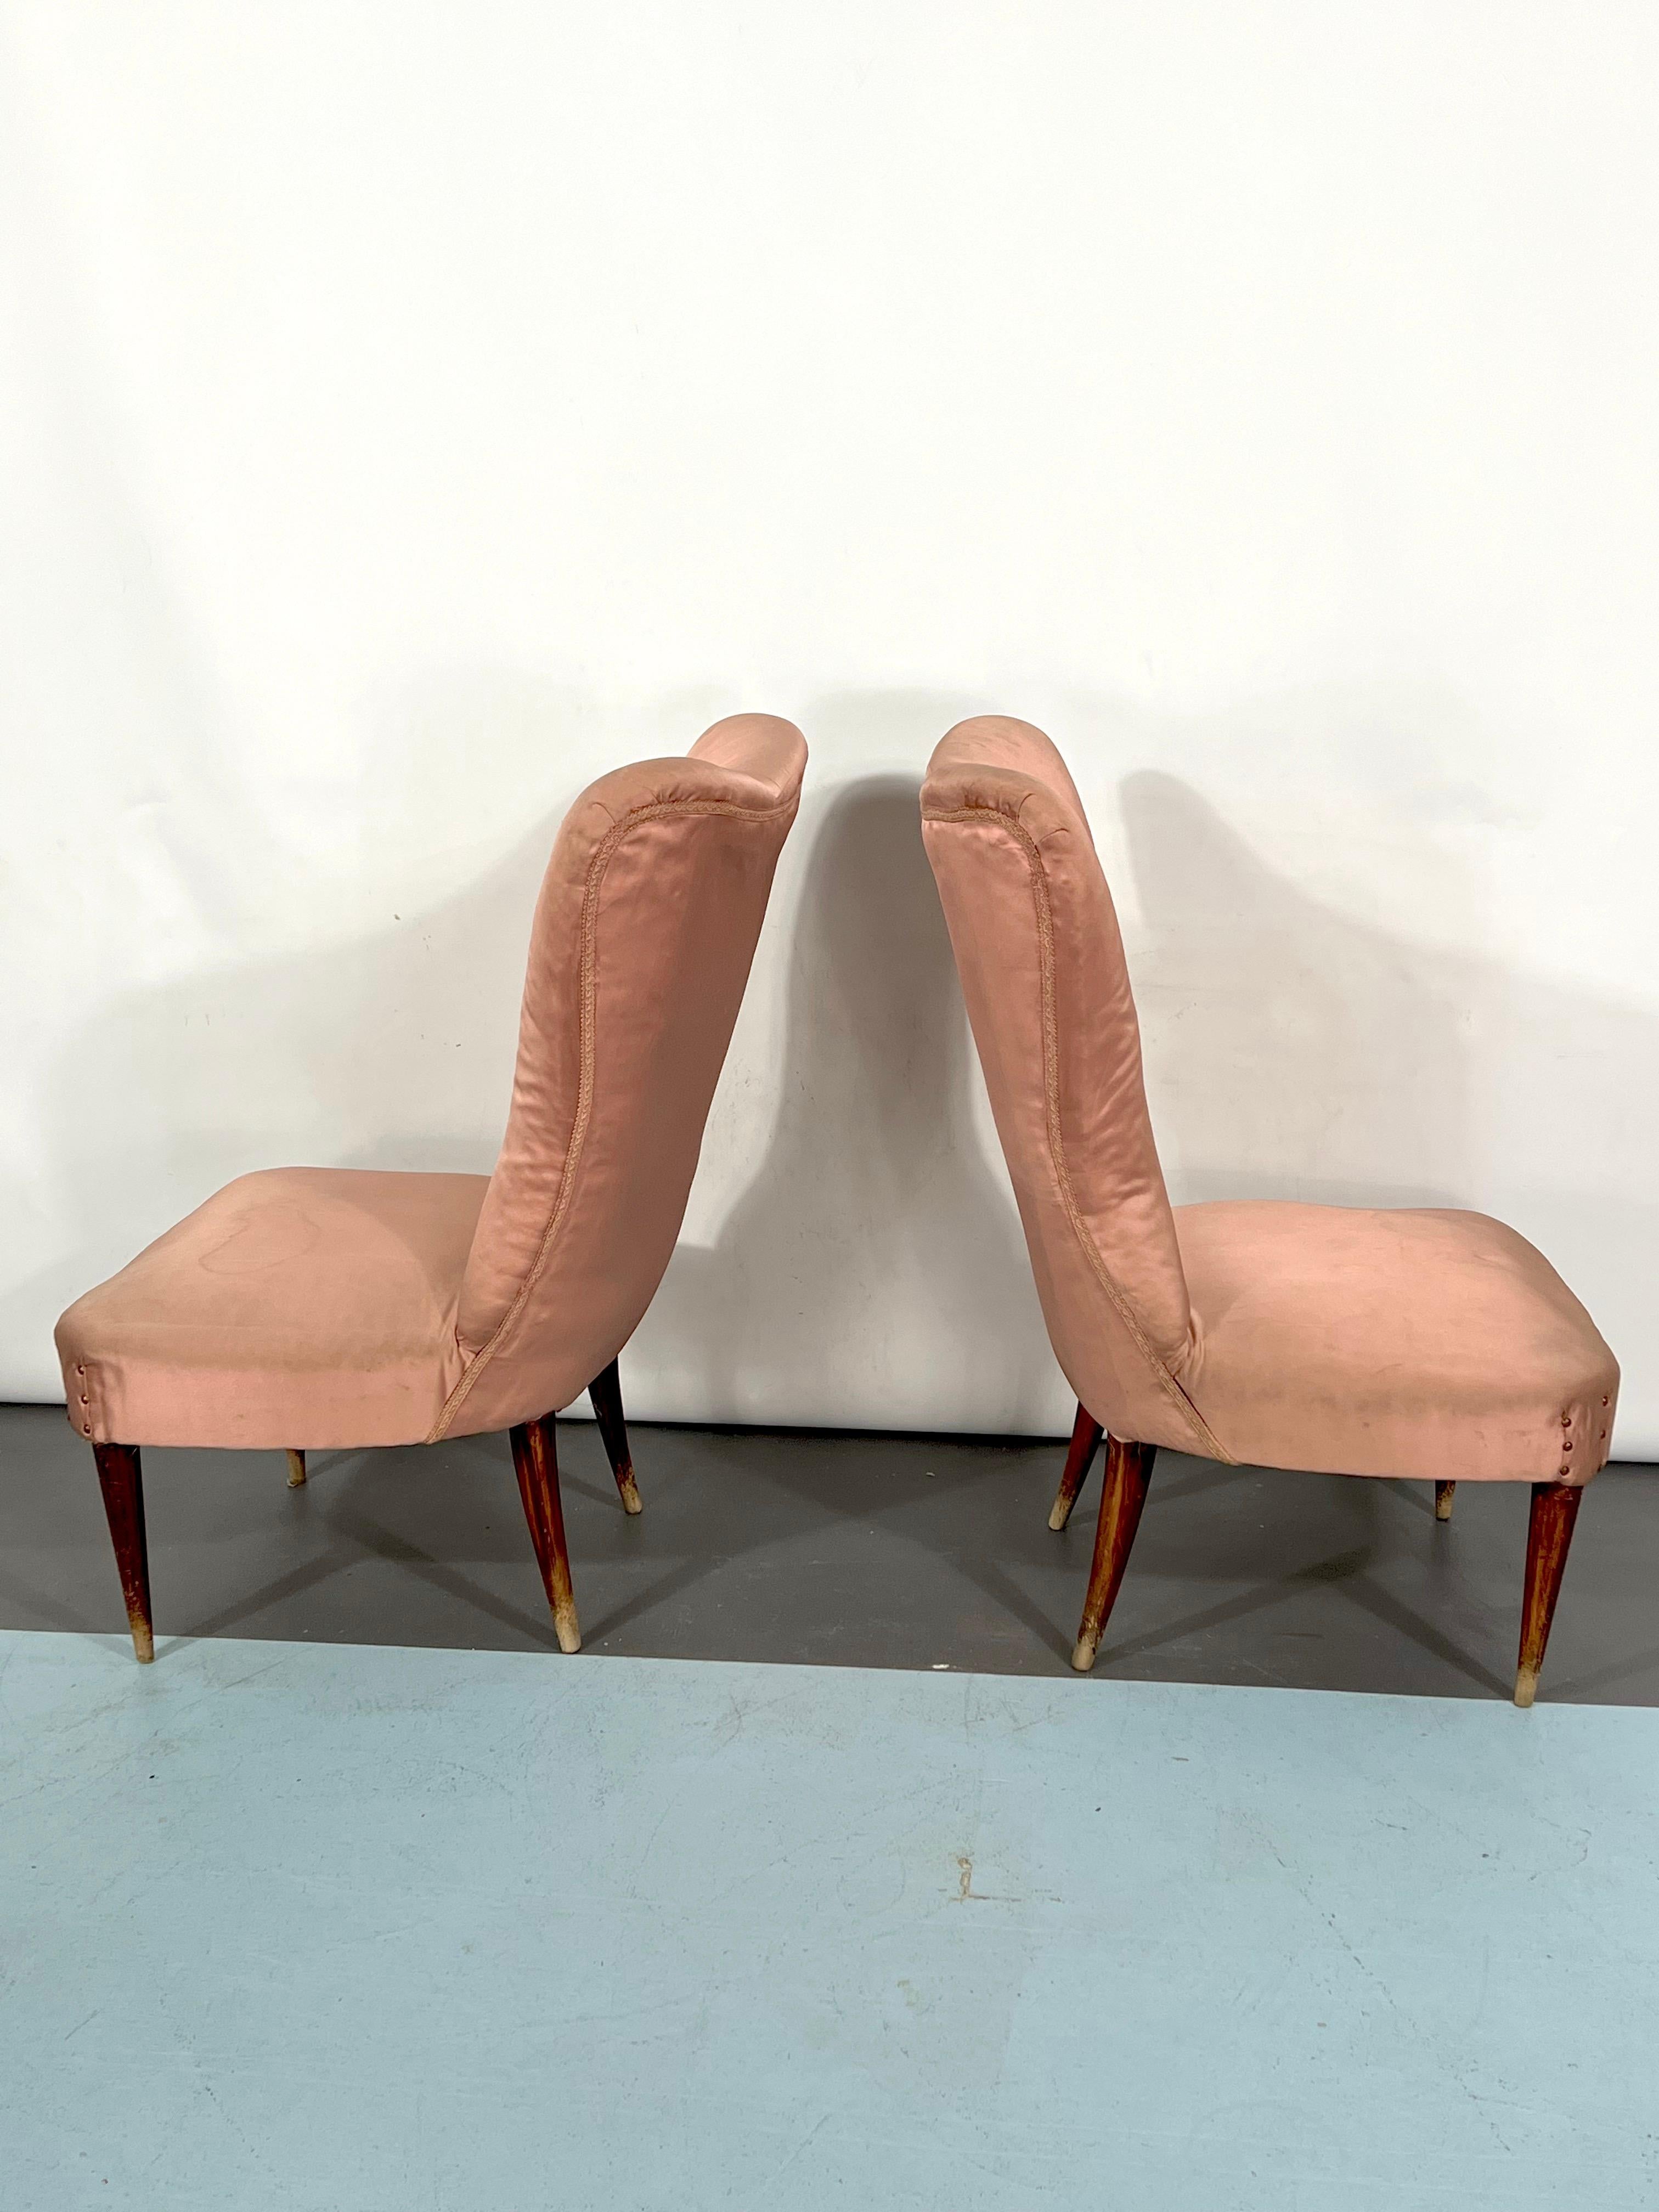 Italian Vintage Pair of Club Armchairs in the Manner of Gio Ponti, 1950s For Sale 3